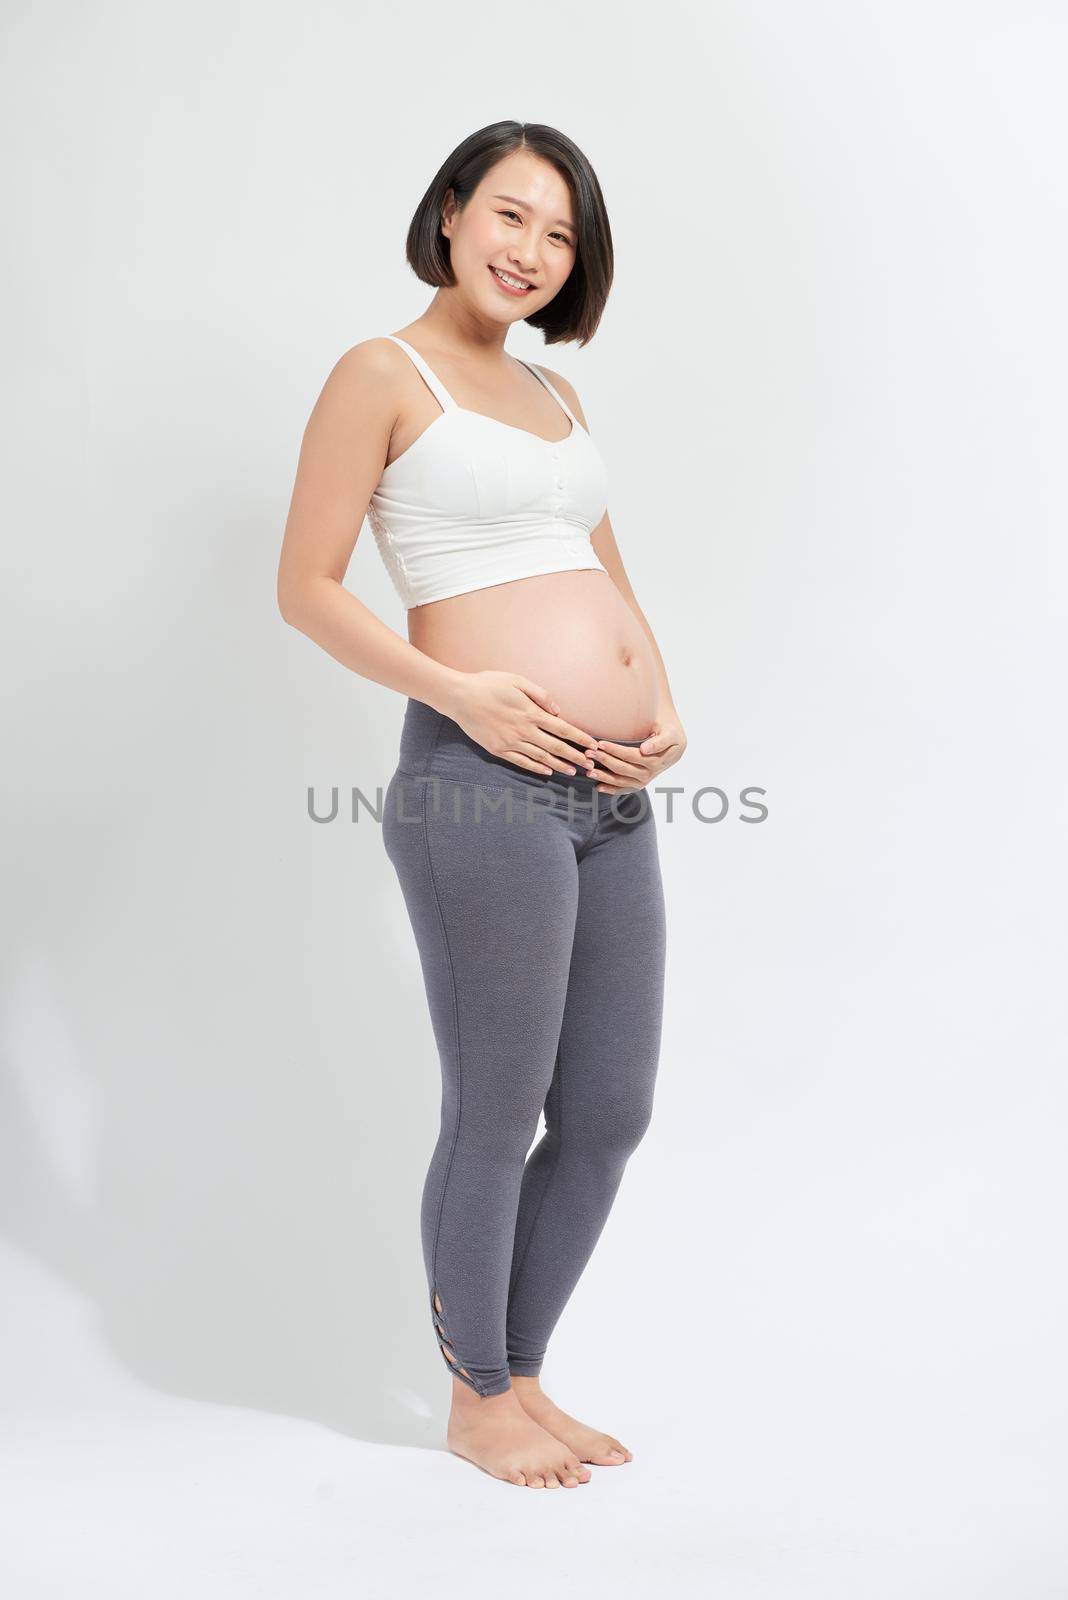 The young expecting mother holding baby in pregnant belly.